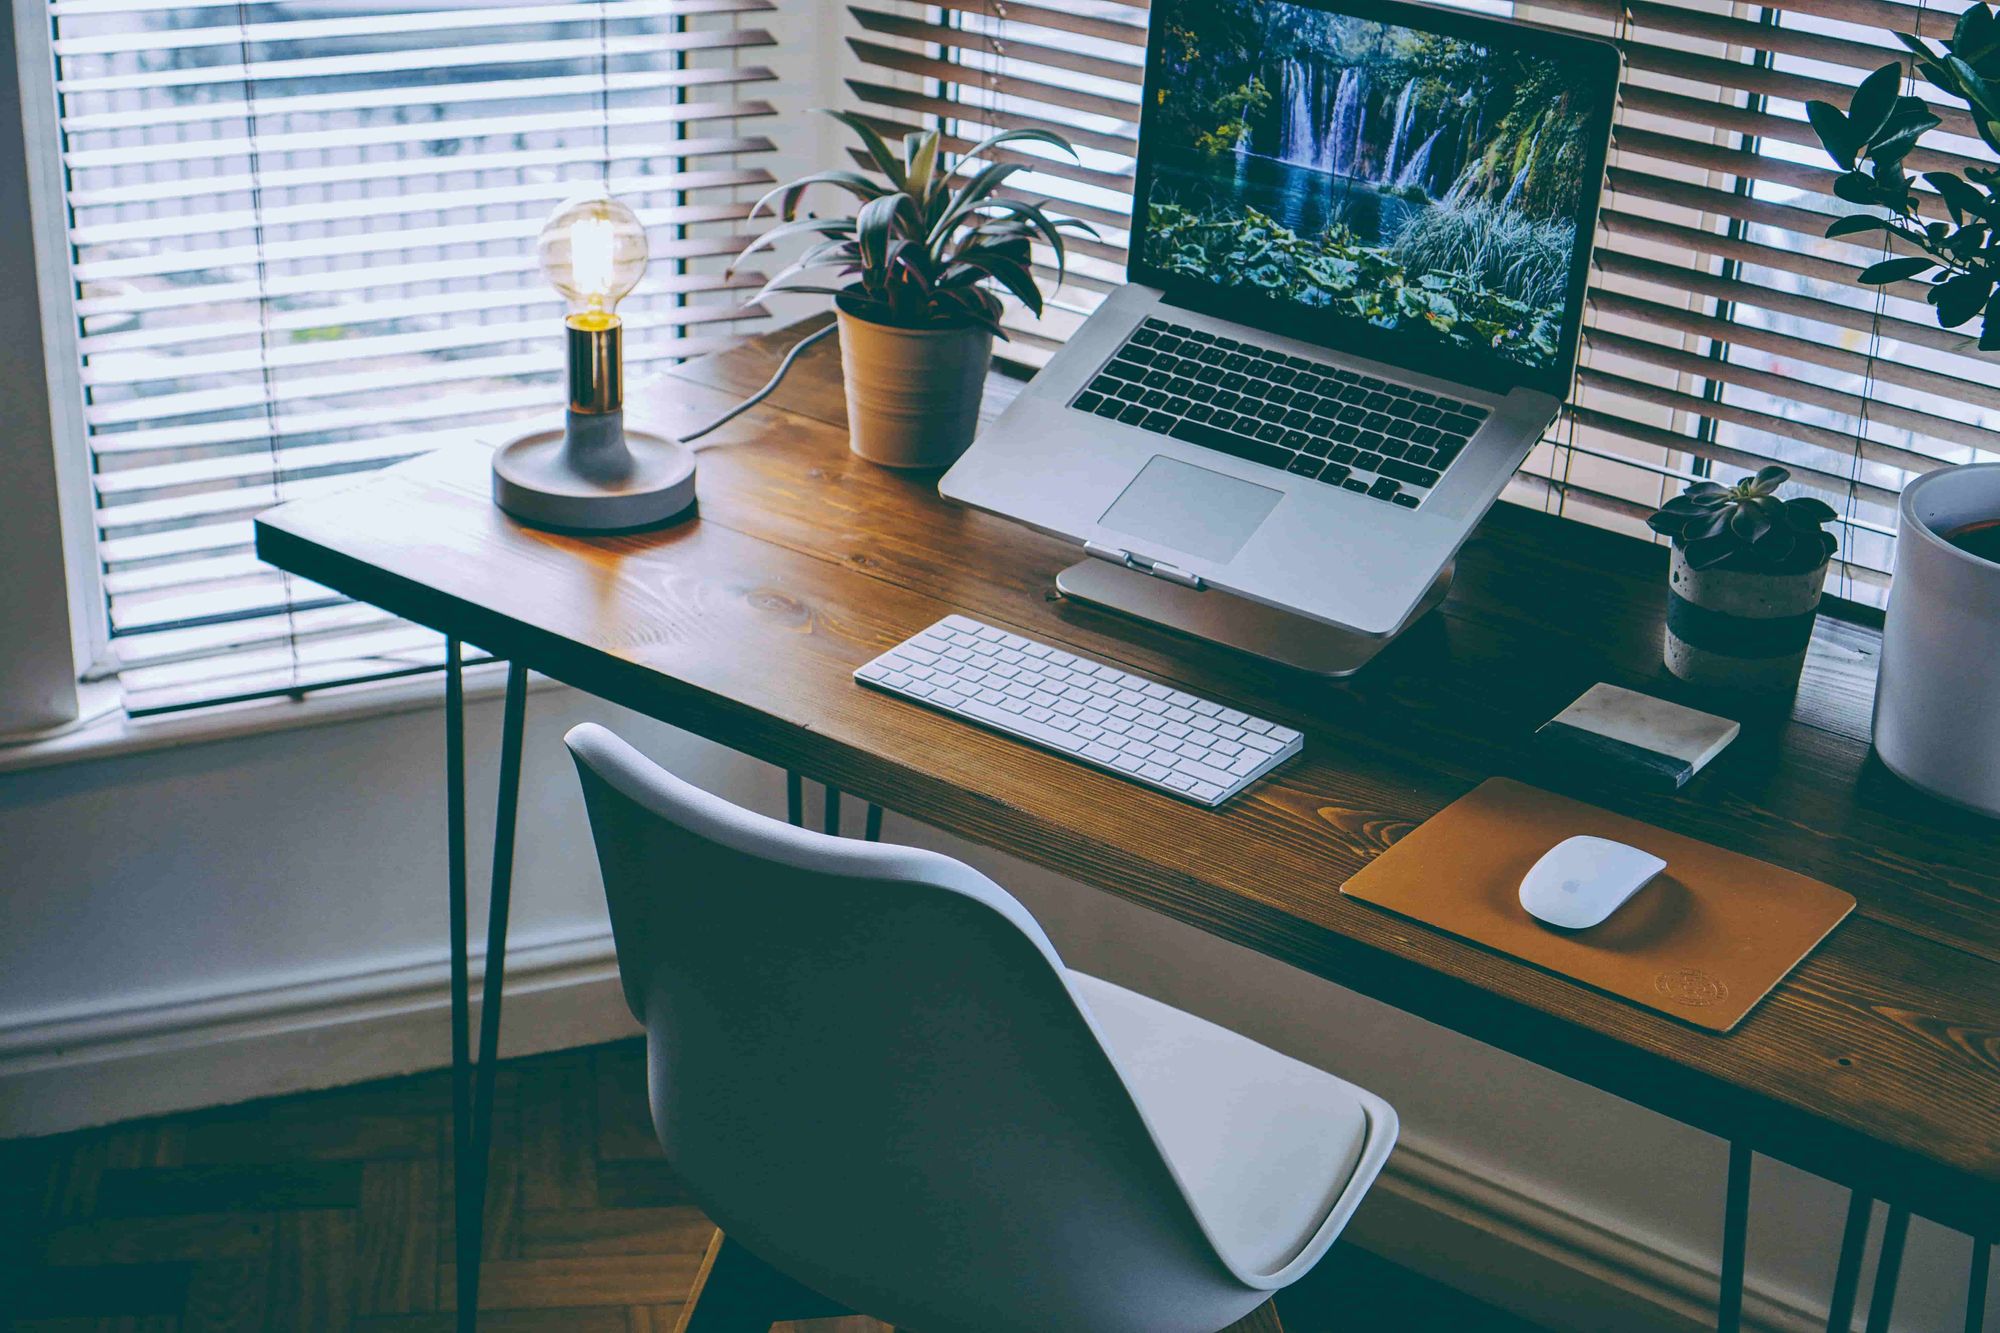 Top 5 Ergonomic Chairs for Working From Home(2023).